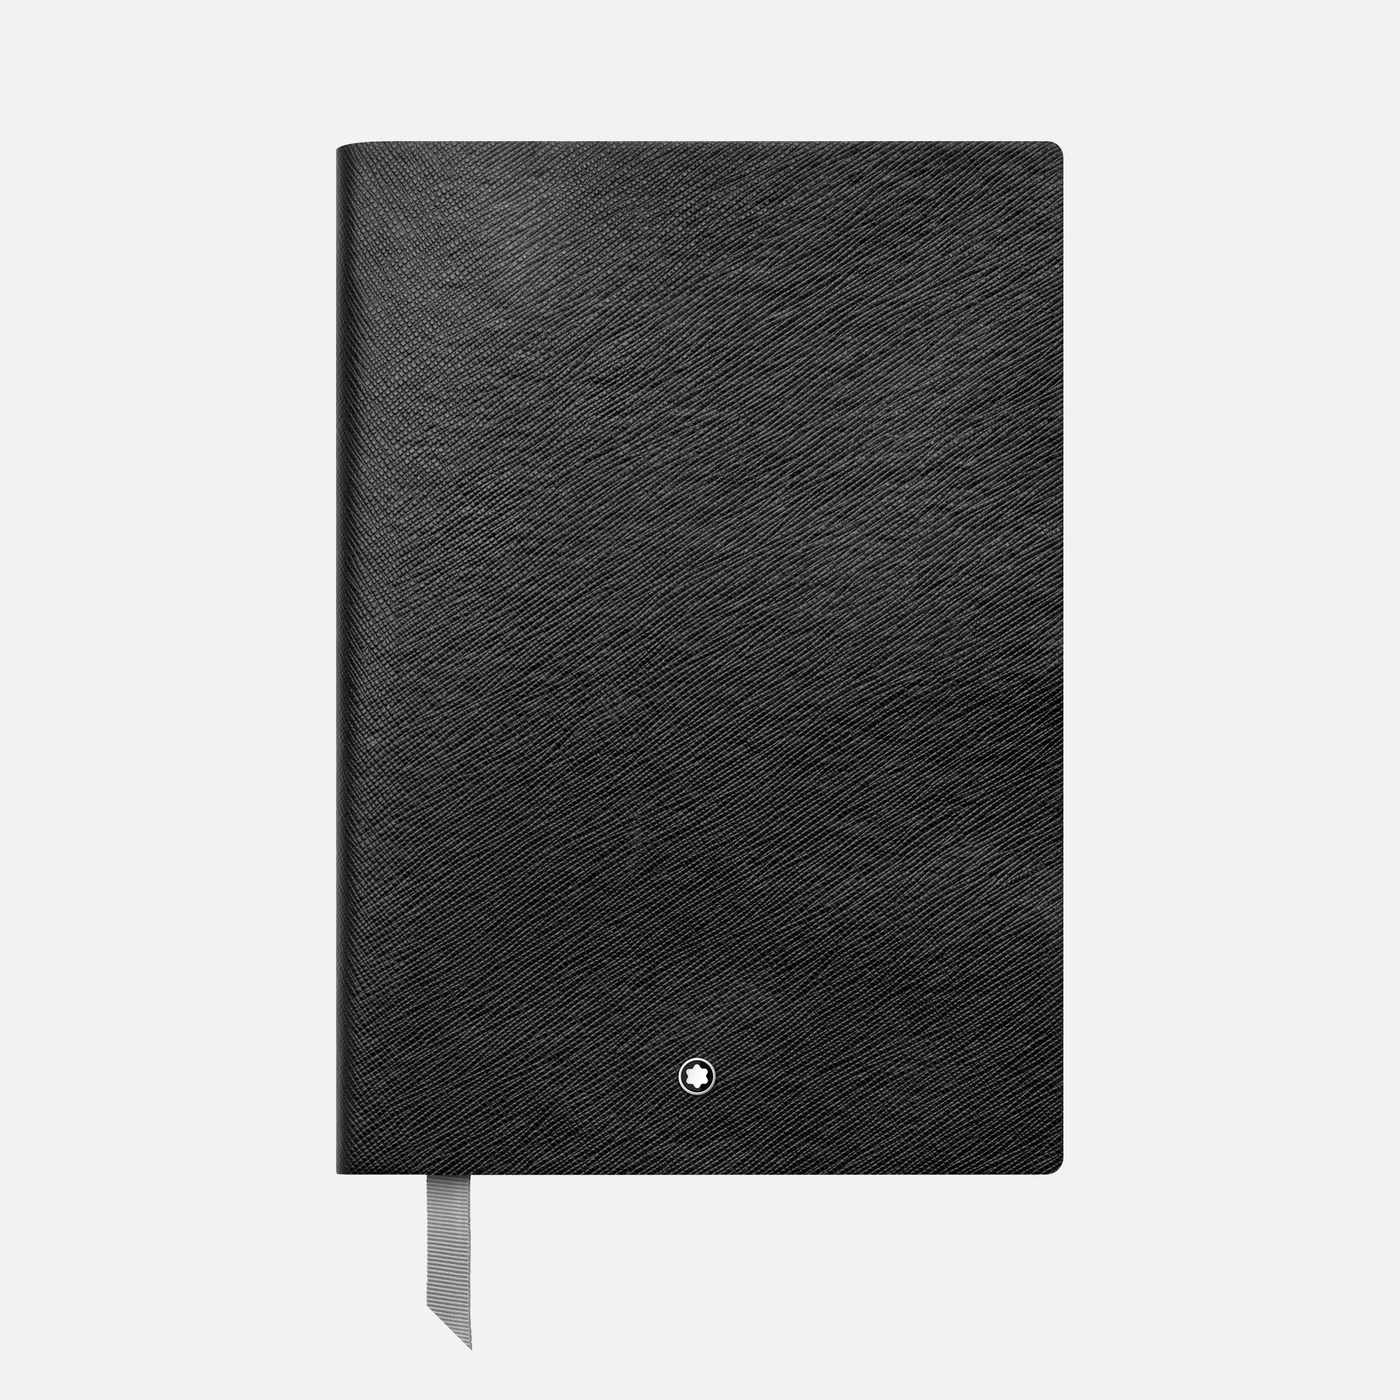 Montblanc Fine Stationery Notebook #146 Black Squared Graph Notebook